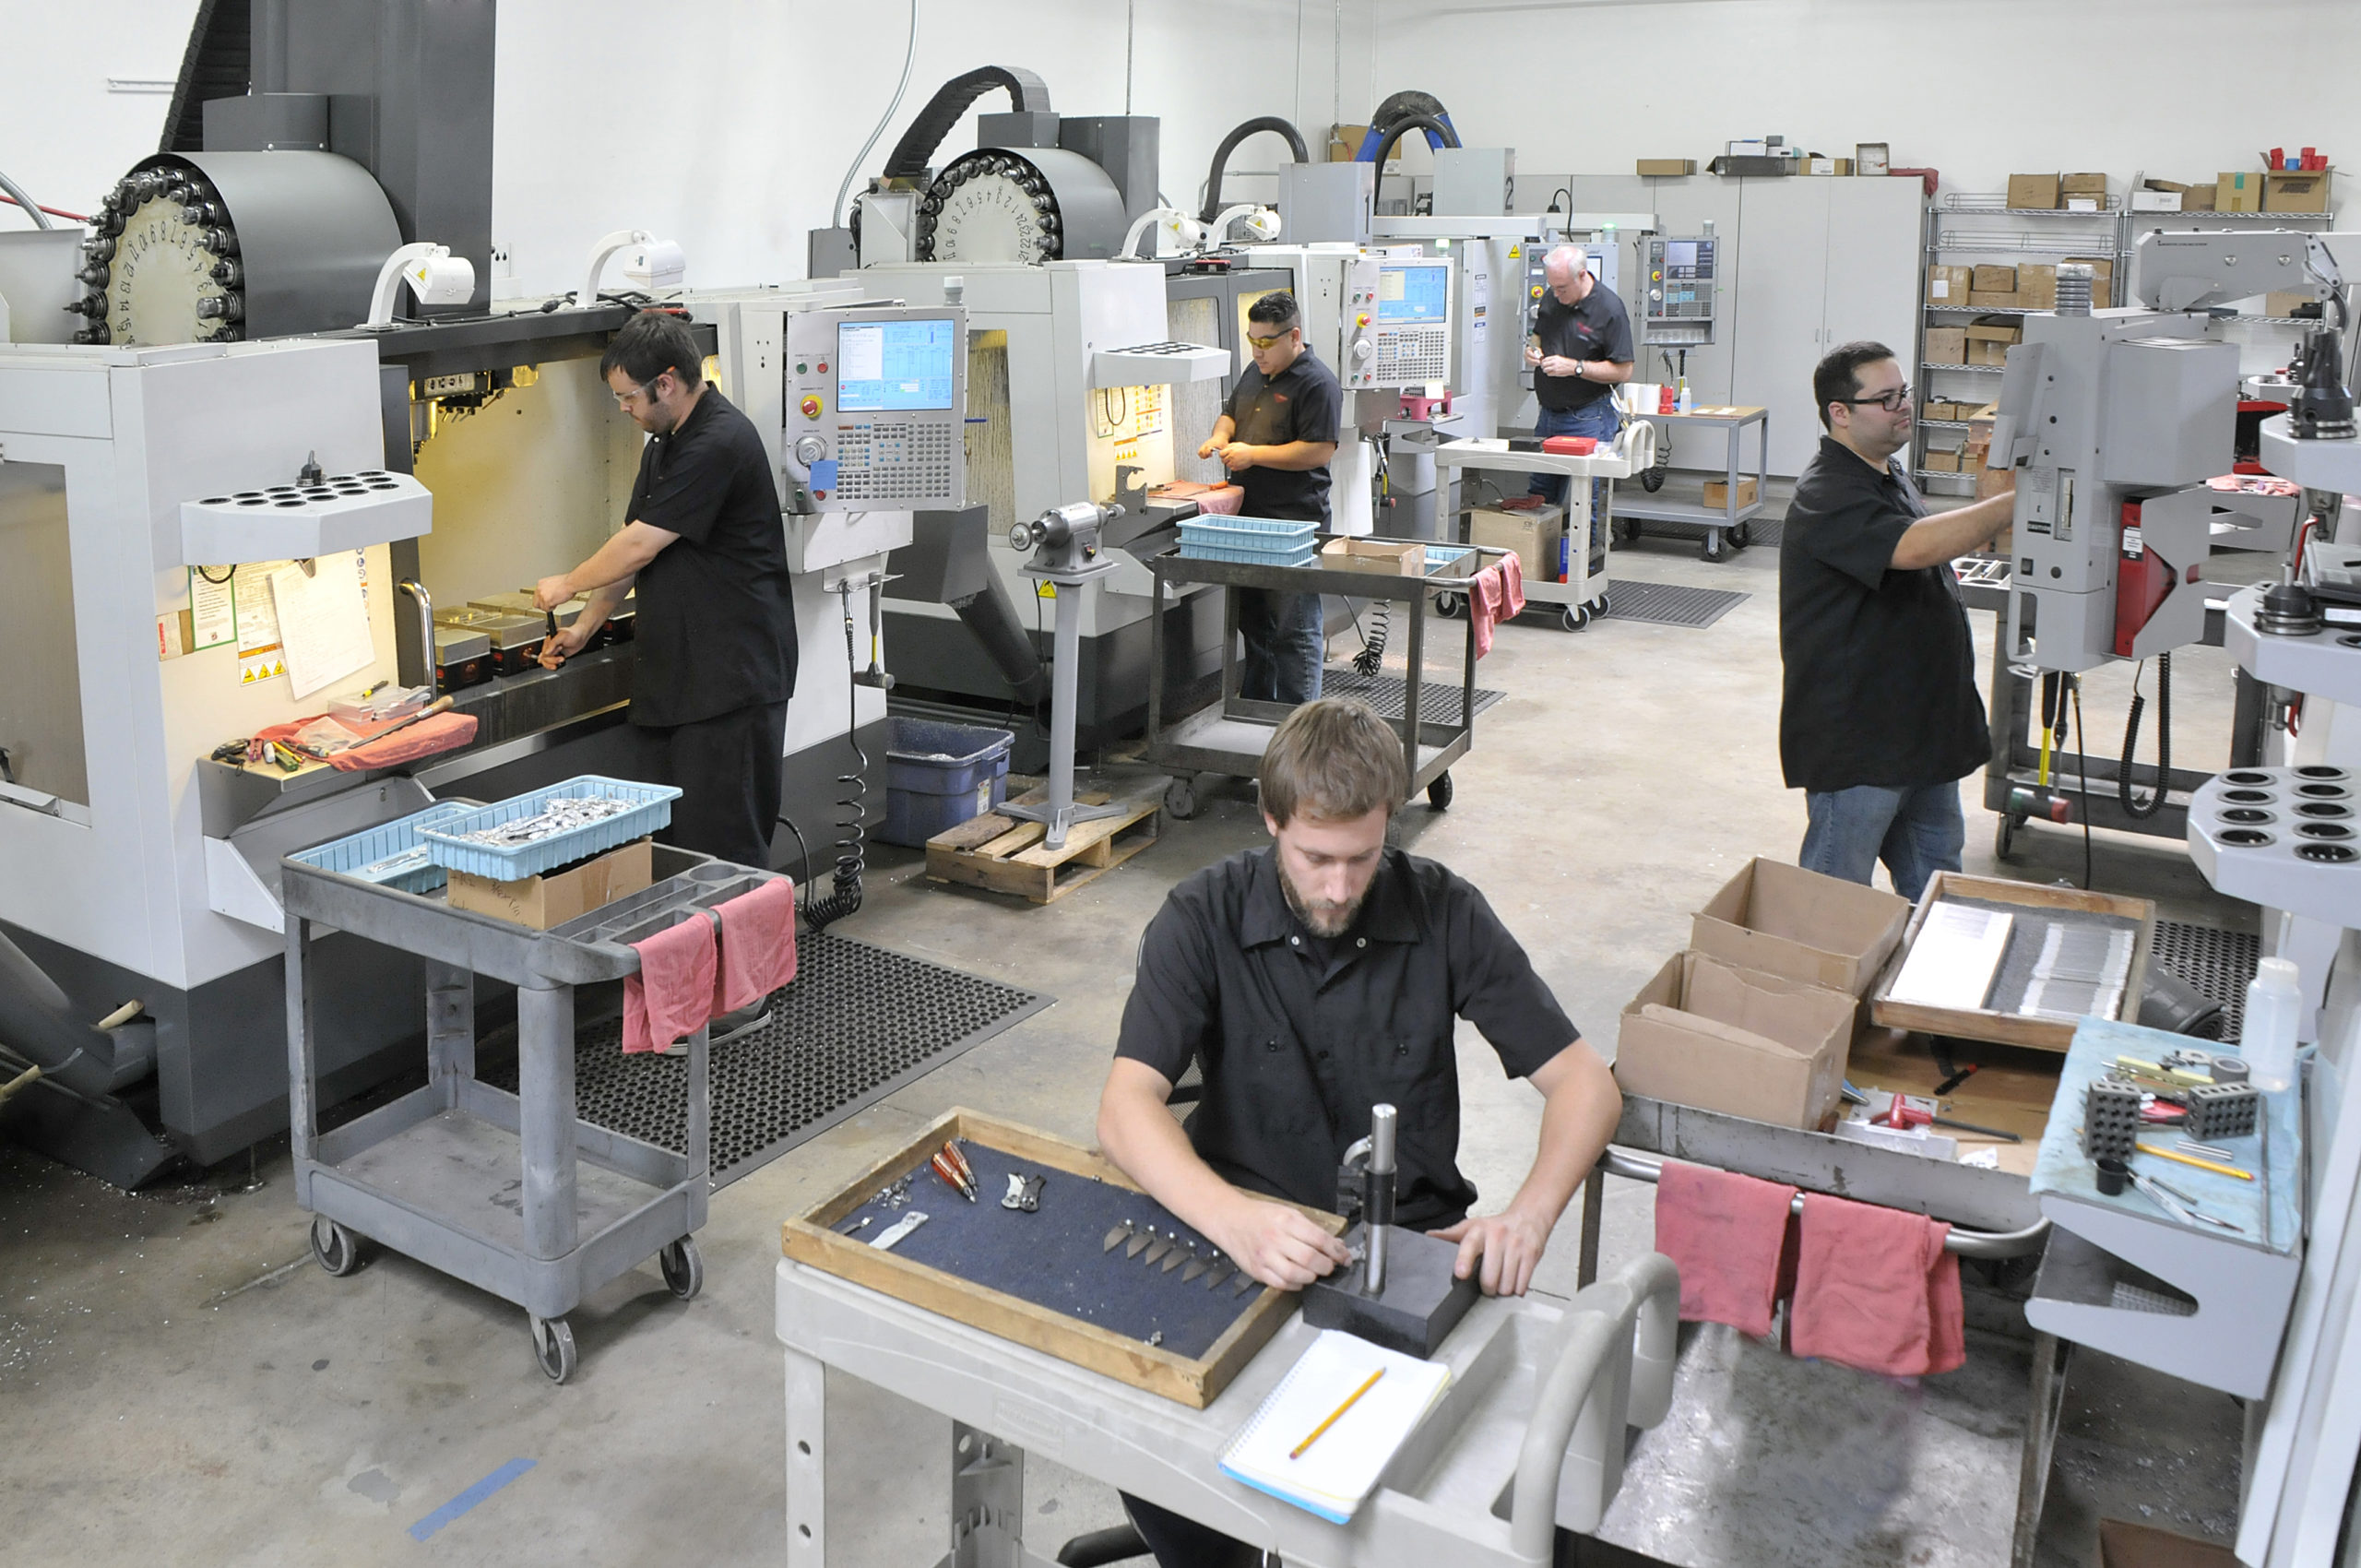 How Much Does CNC Training Cost?